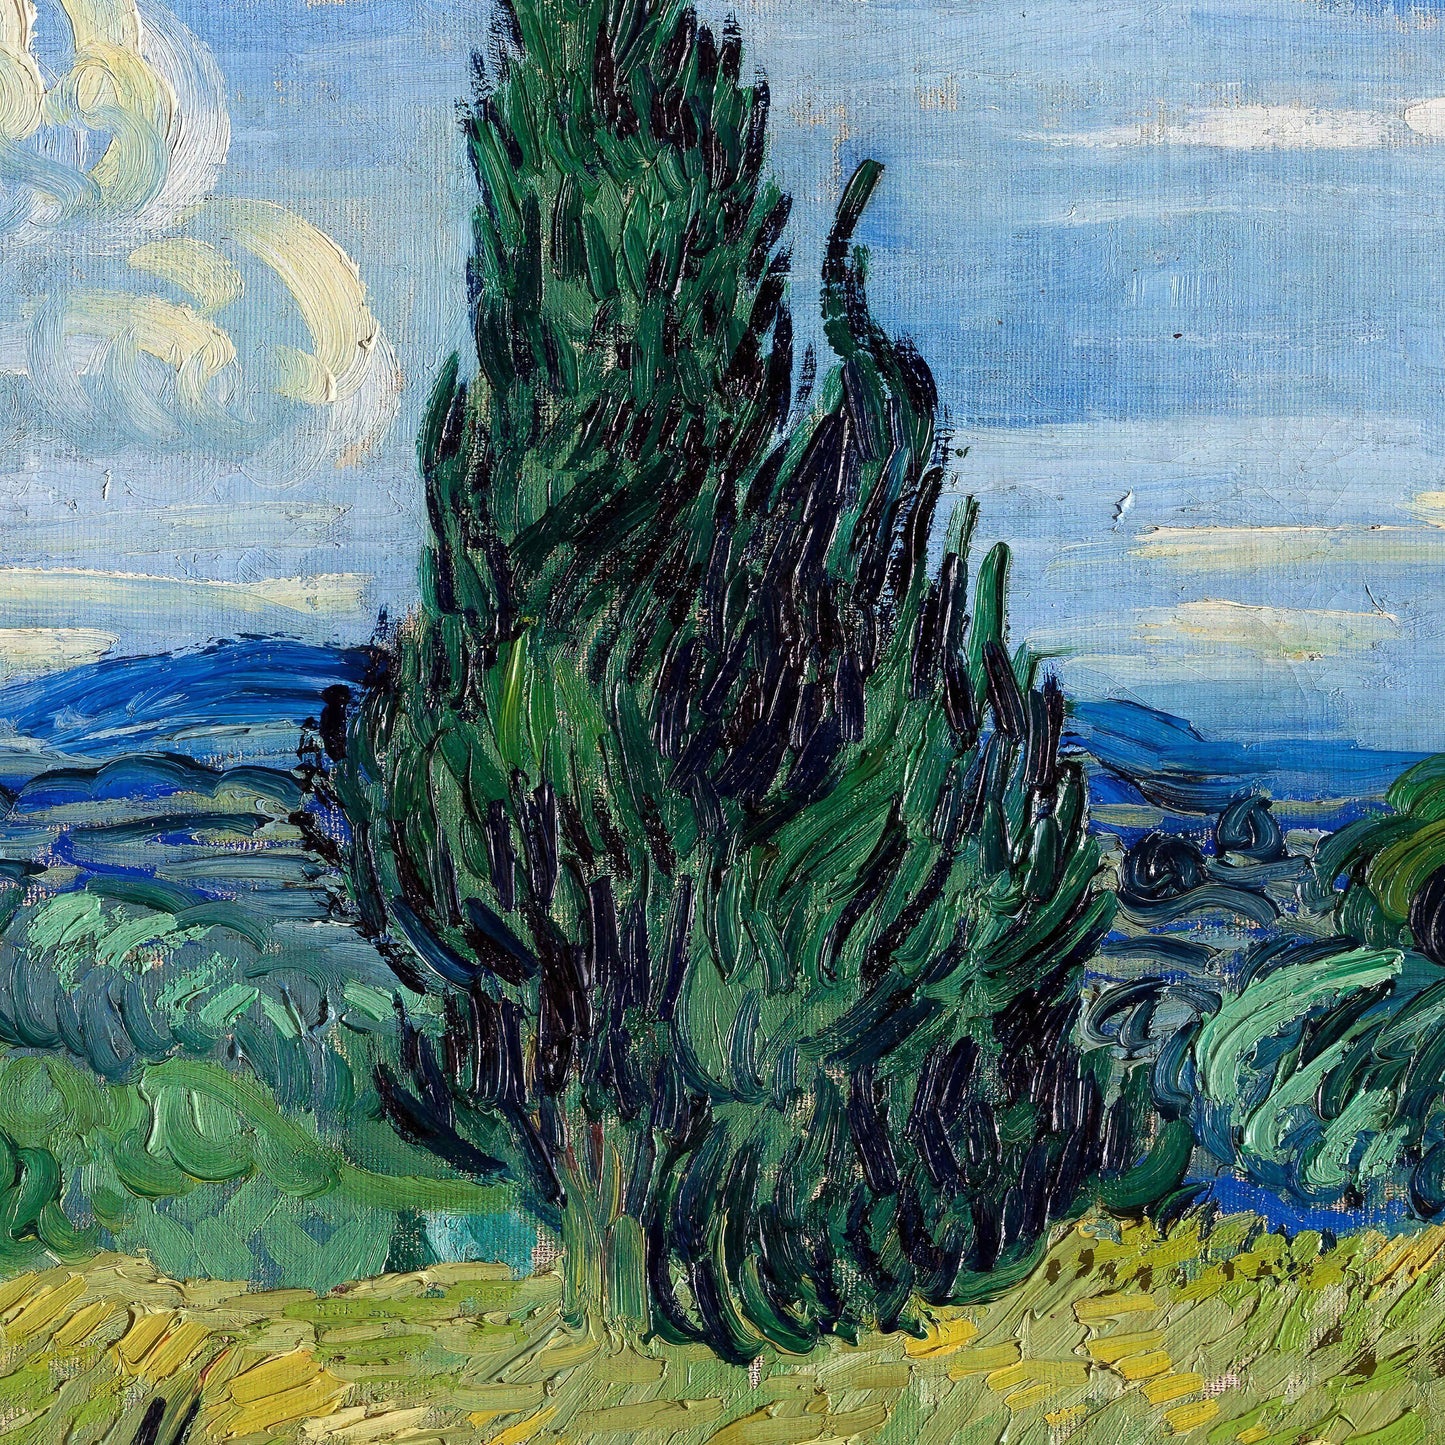 Green Wheat by Vincent Van Gogh, 3d Printed with texture and brush strokes looks like original oil-painting, code:072